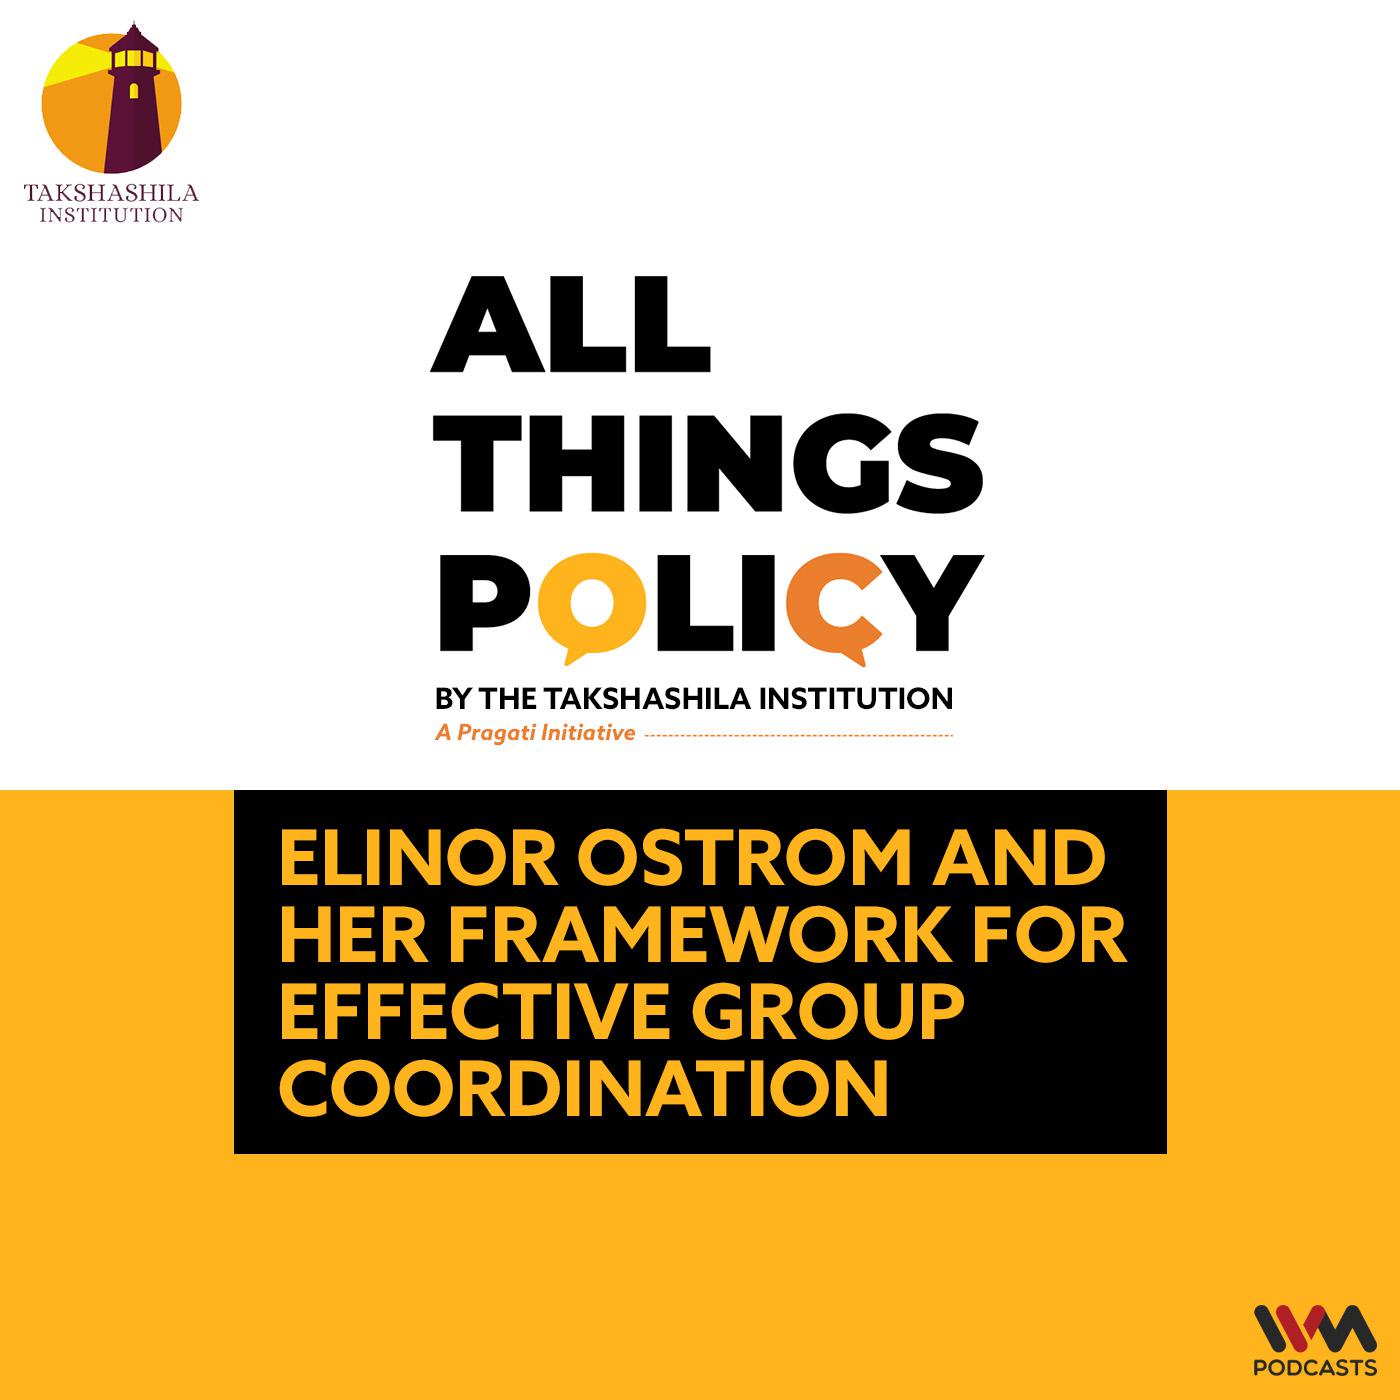 Elinor Ostrom and her framework for effective group coordination